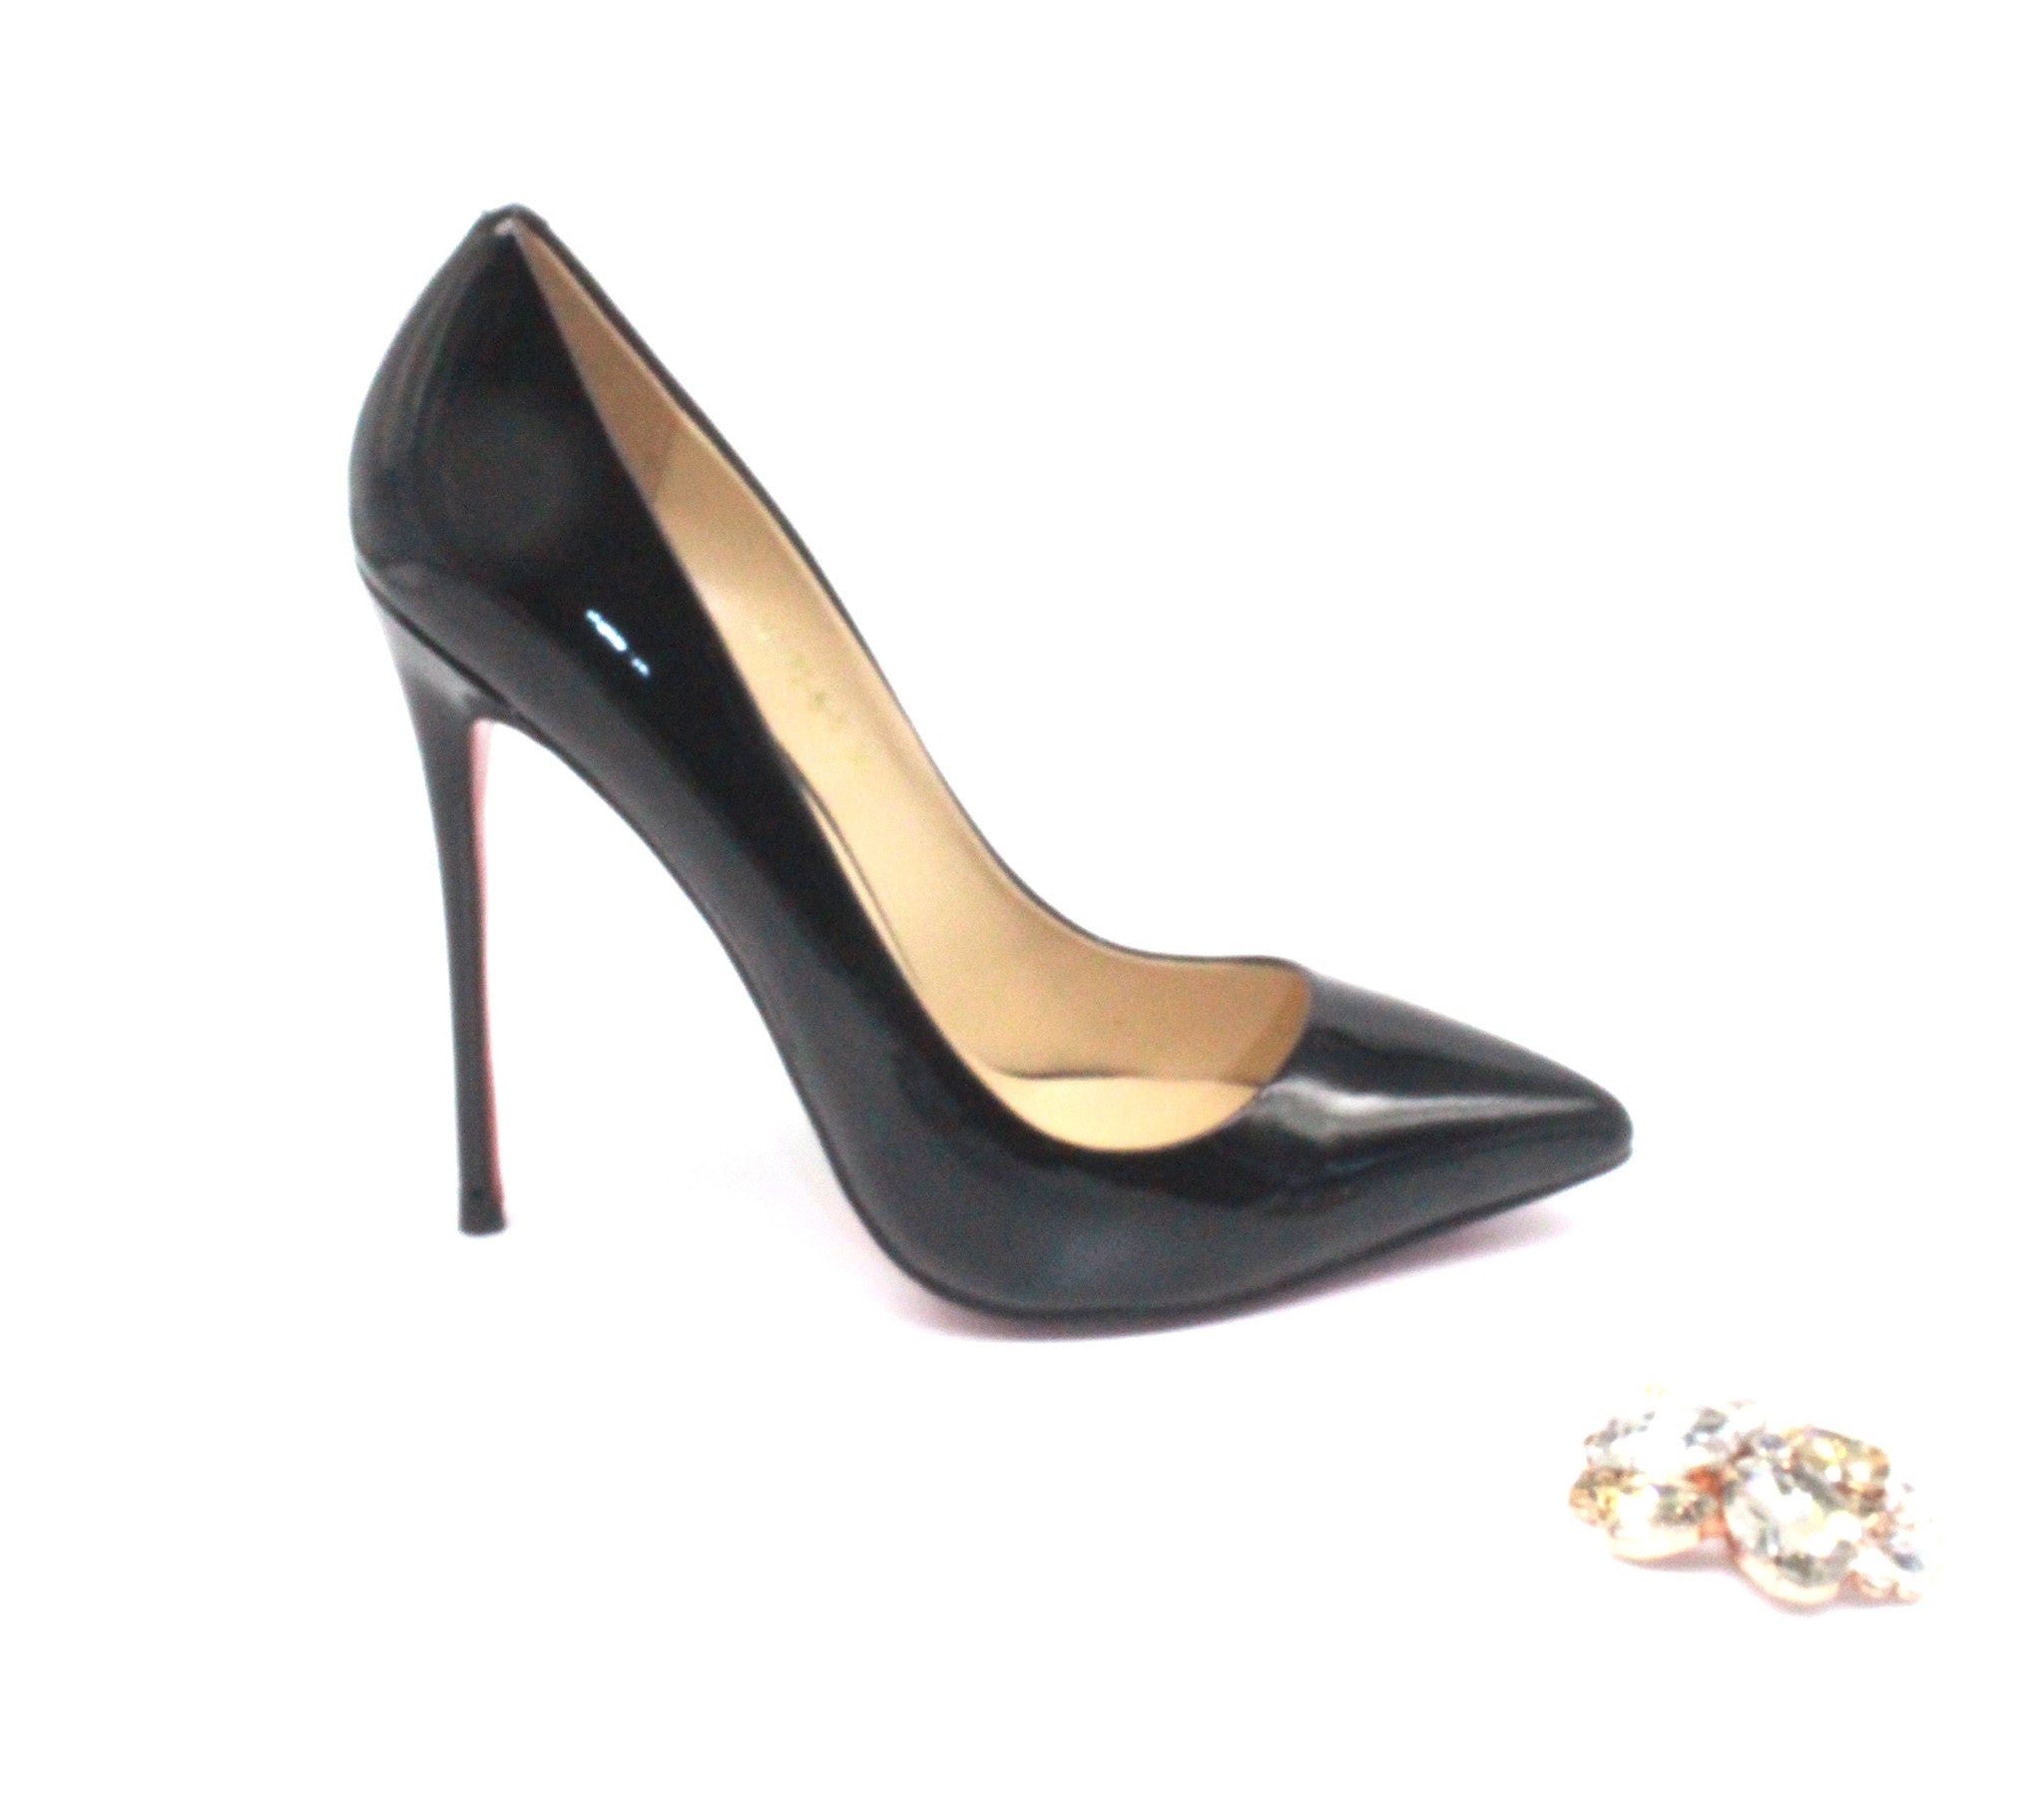 4 inch pointed toe heels